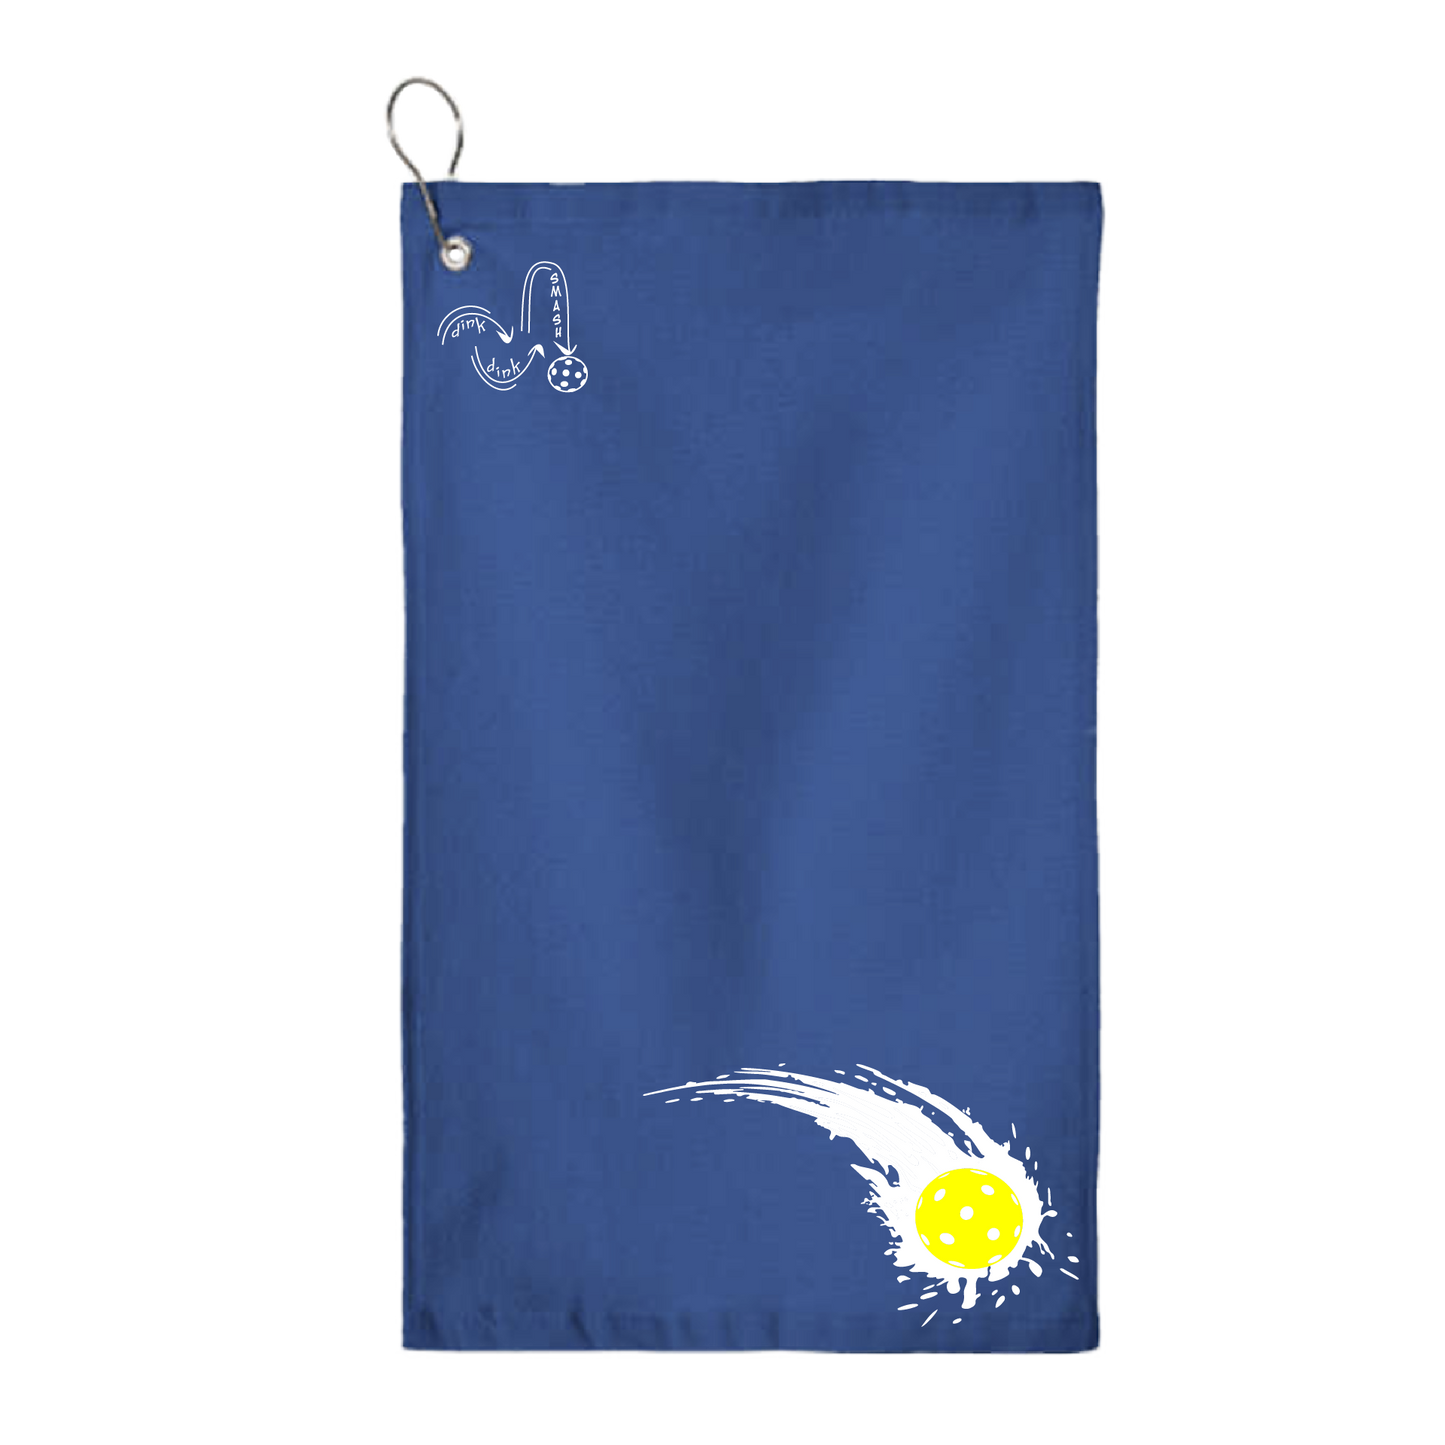 This Impact Pickleball towel is crafted with cotton terry velour for optimal performance. It features grommets, hooks, and hemmed edges for added durability. It's perfect for completing your pickleball gear, and an ideal gift for friends and tournaments. The towel is designed to be both absorbent and lightweight, so you can remain dry and comfortable while you play. 